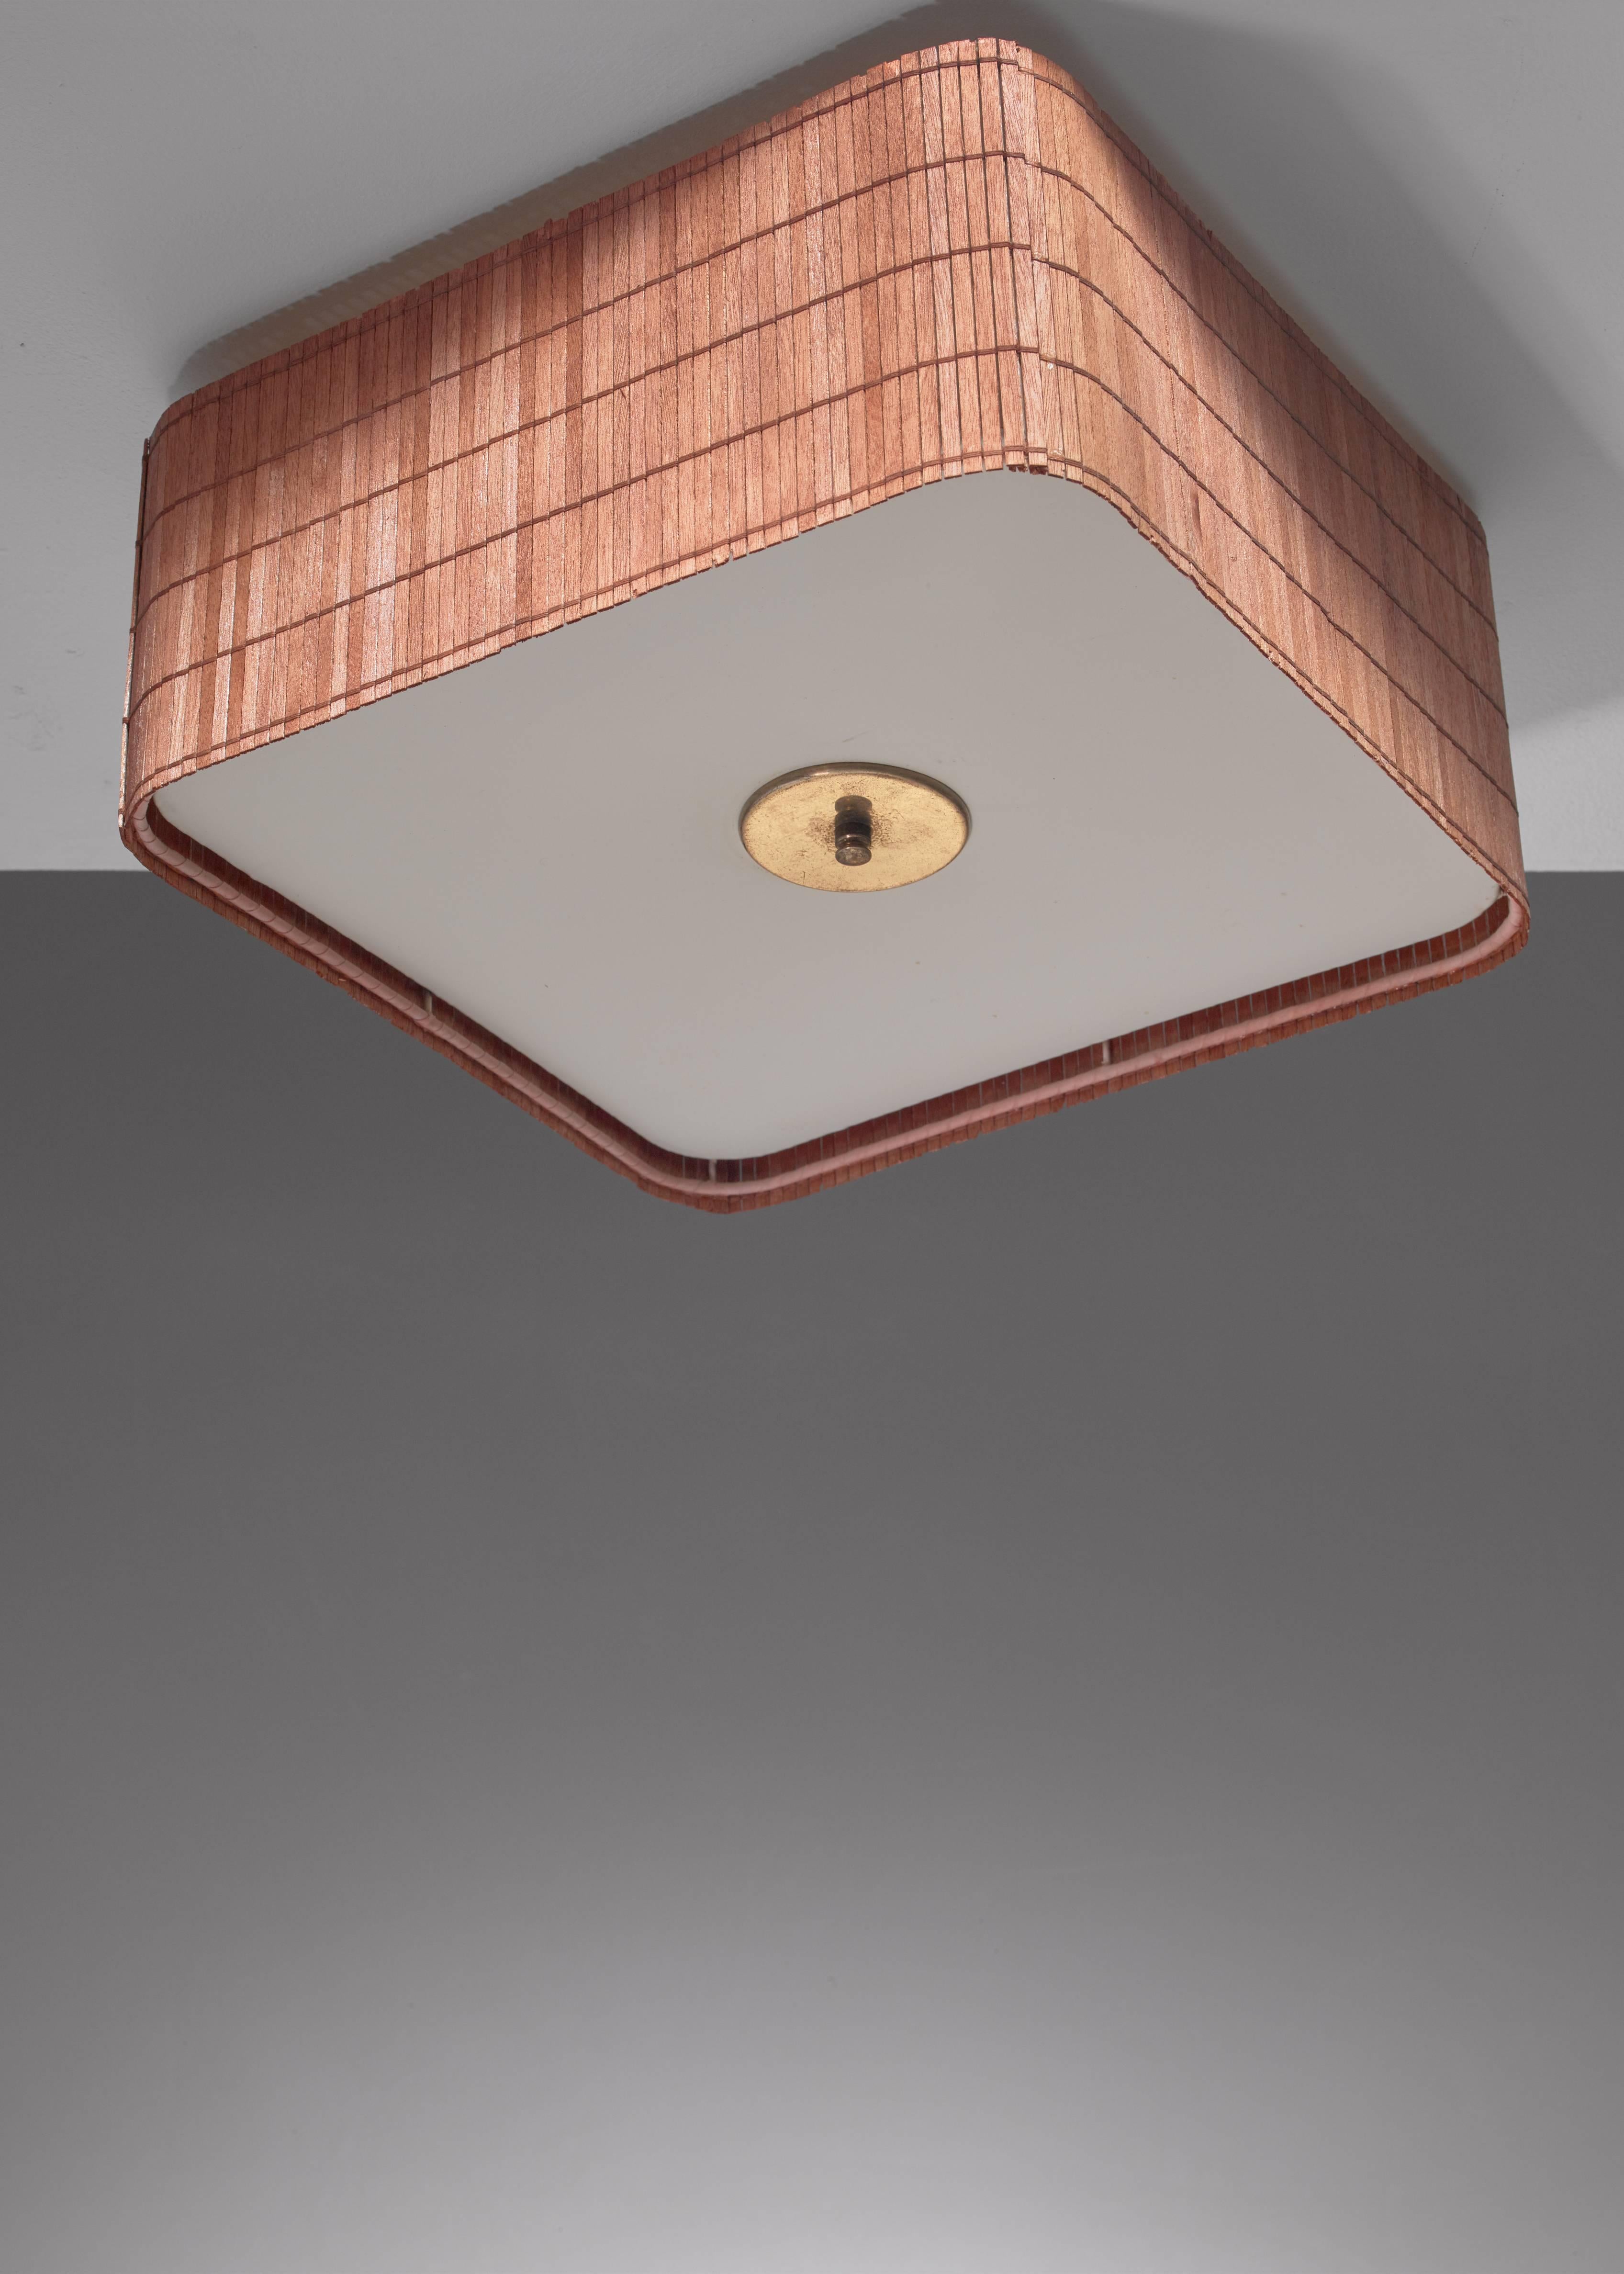 A rare Paavo Tynell square flush mount ceiling lamp for Taito, from circa 1950. The lamp is made of thin wood strips woven together and a plastic fabric diffuser.
*This piece is curated for you by Bloomberry *